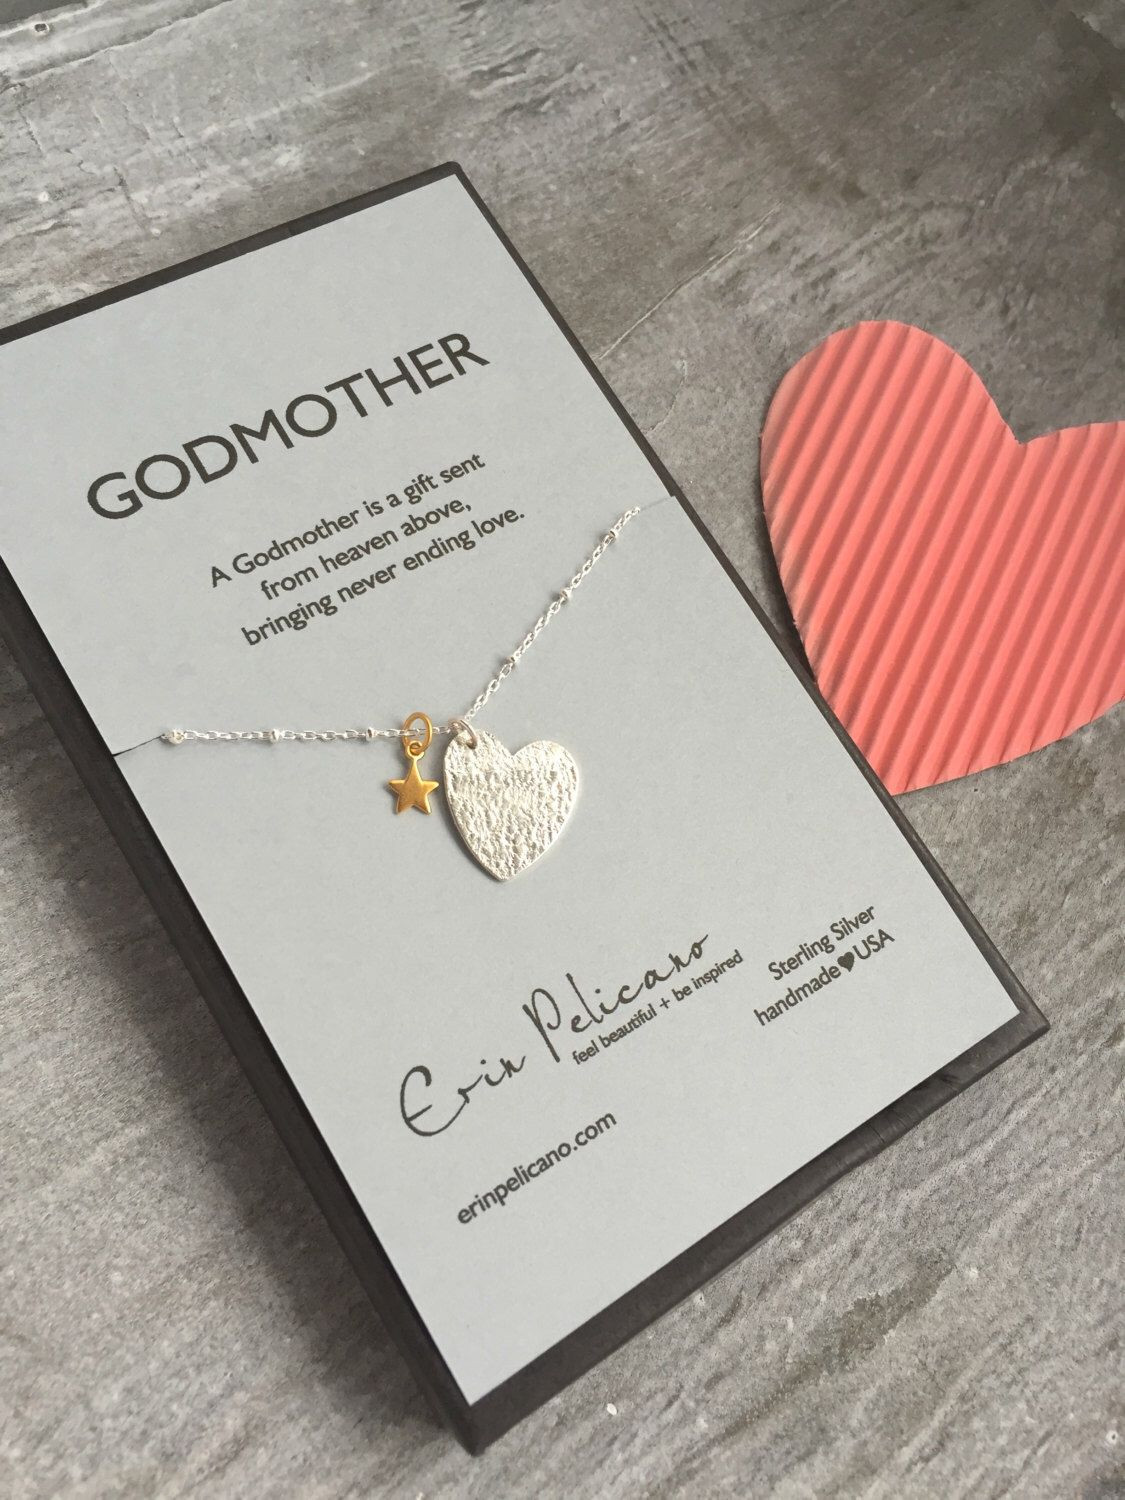 Christening Gift Ideas From Godmother
 Godmother Necklace Will You Be My Godmother Gift Baptism